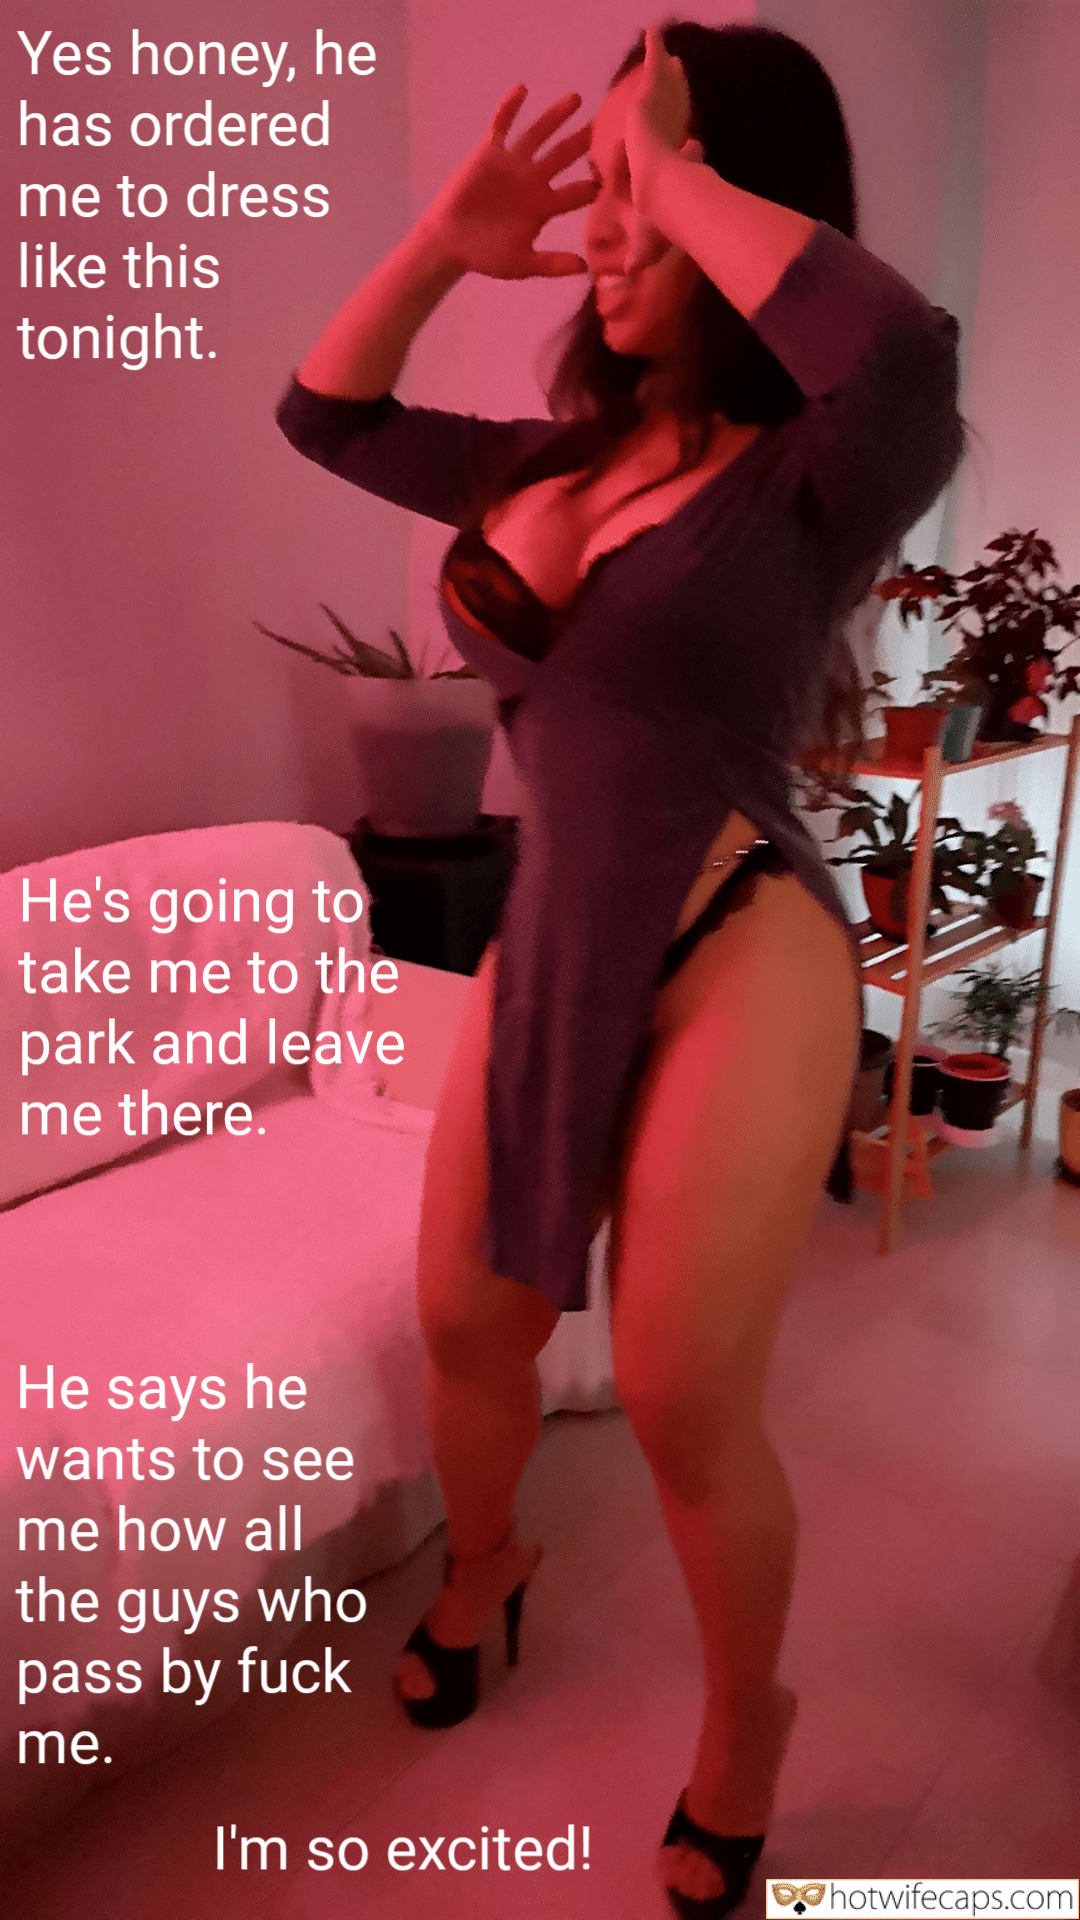 Wife Sharing Public Humiliation Group Sex Getting Ready Dogging Cum Slut Cheating Challenges and Rules Bull hotwife caption: Yes honey, he has ordered me to dress like this tonight. He’s going to take me to the park and leave me there. He says he wants to see me how all the guys who pass by fuck me. I’m...